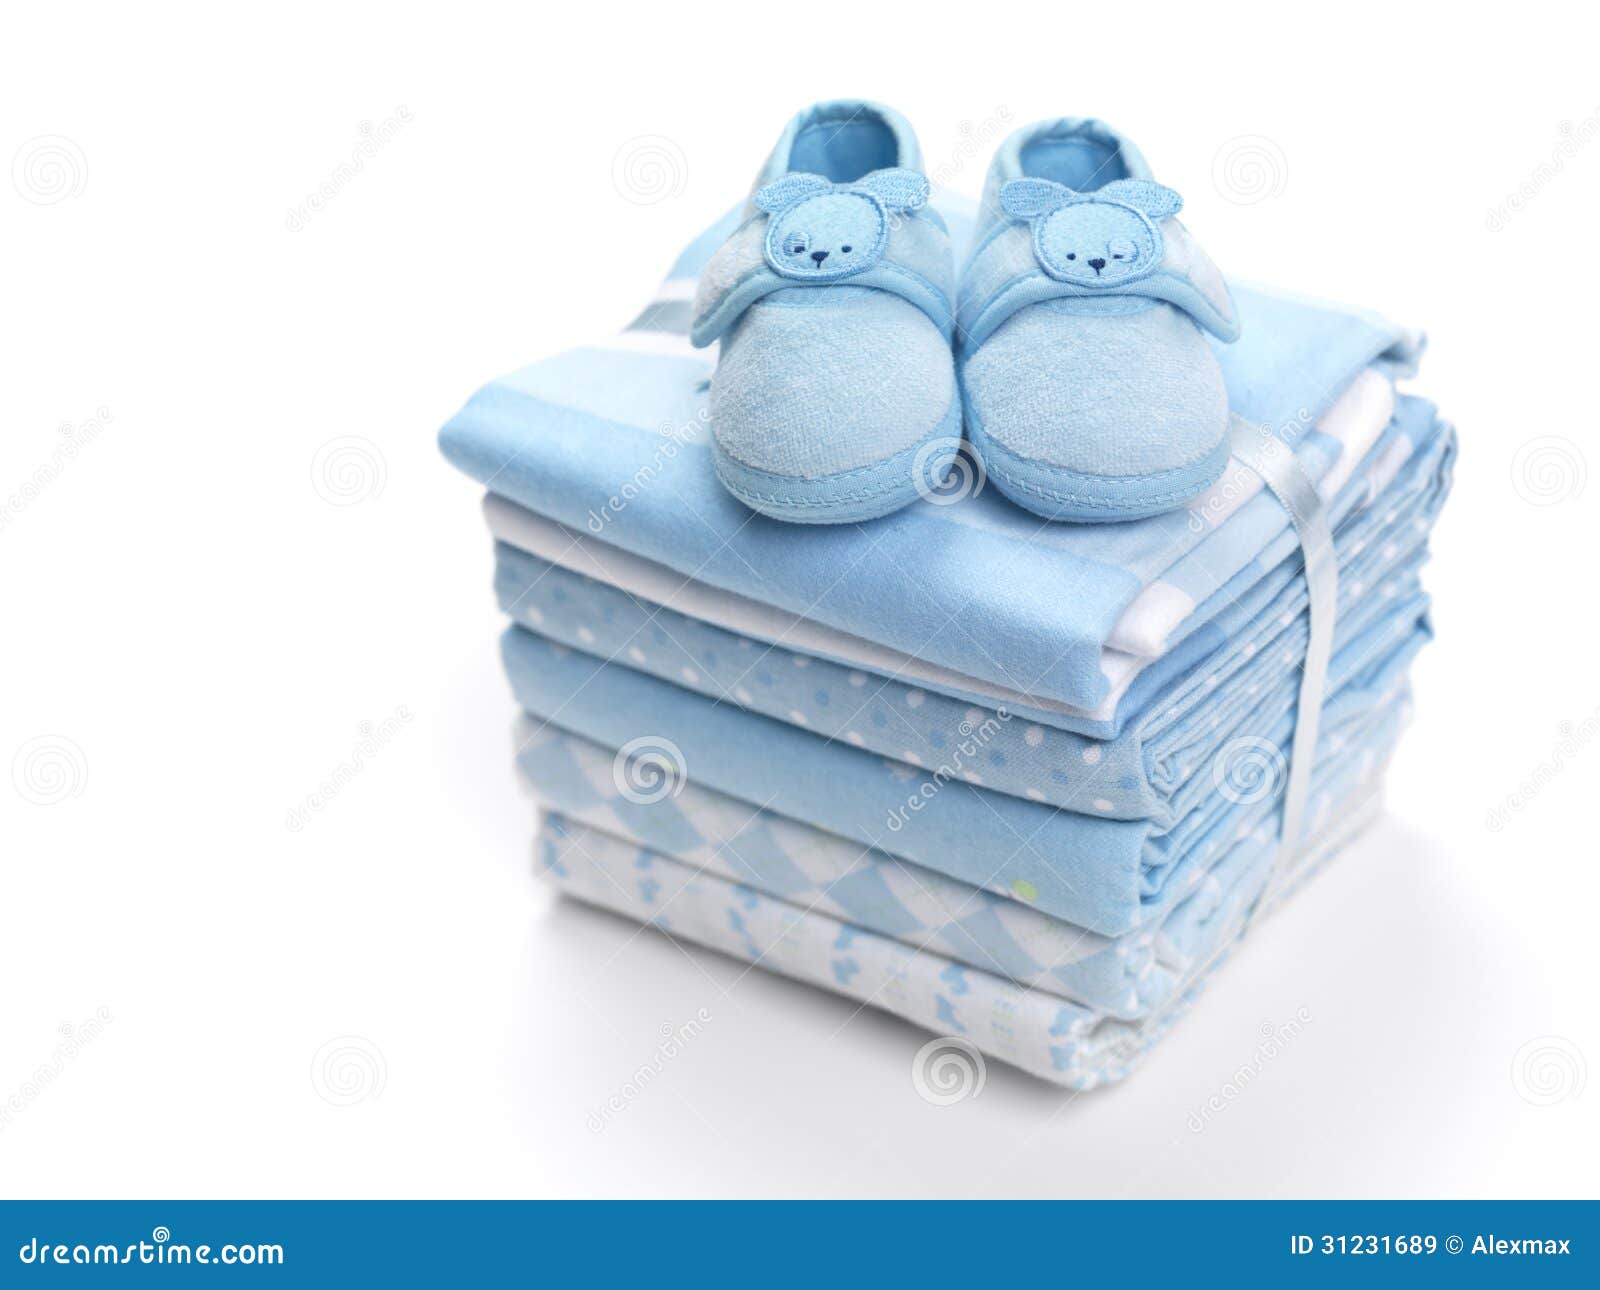 Cute blue baby boy shoes on a pile of swaddling blankets isolated on ...